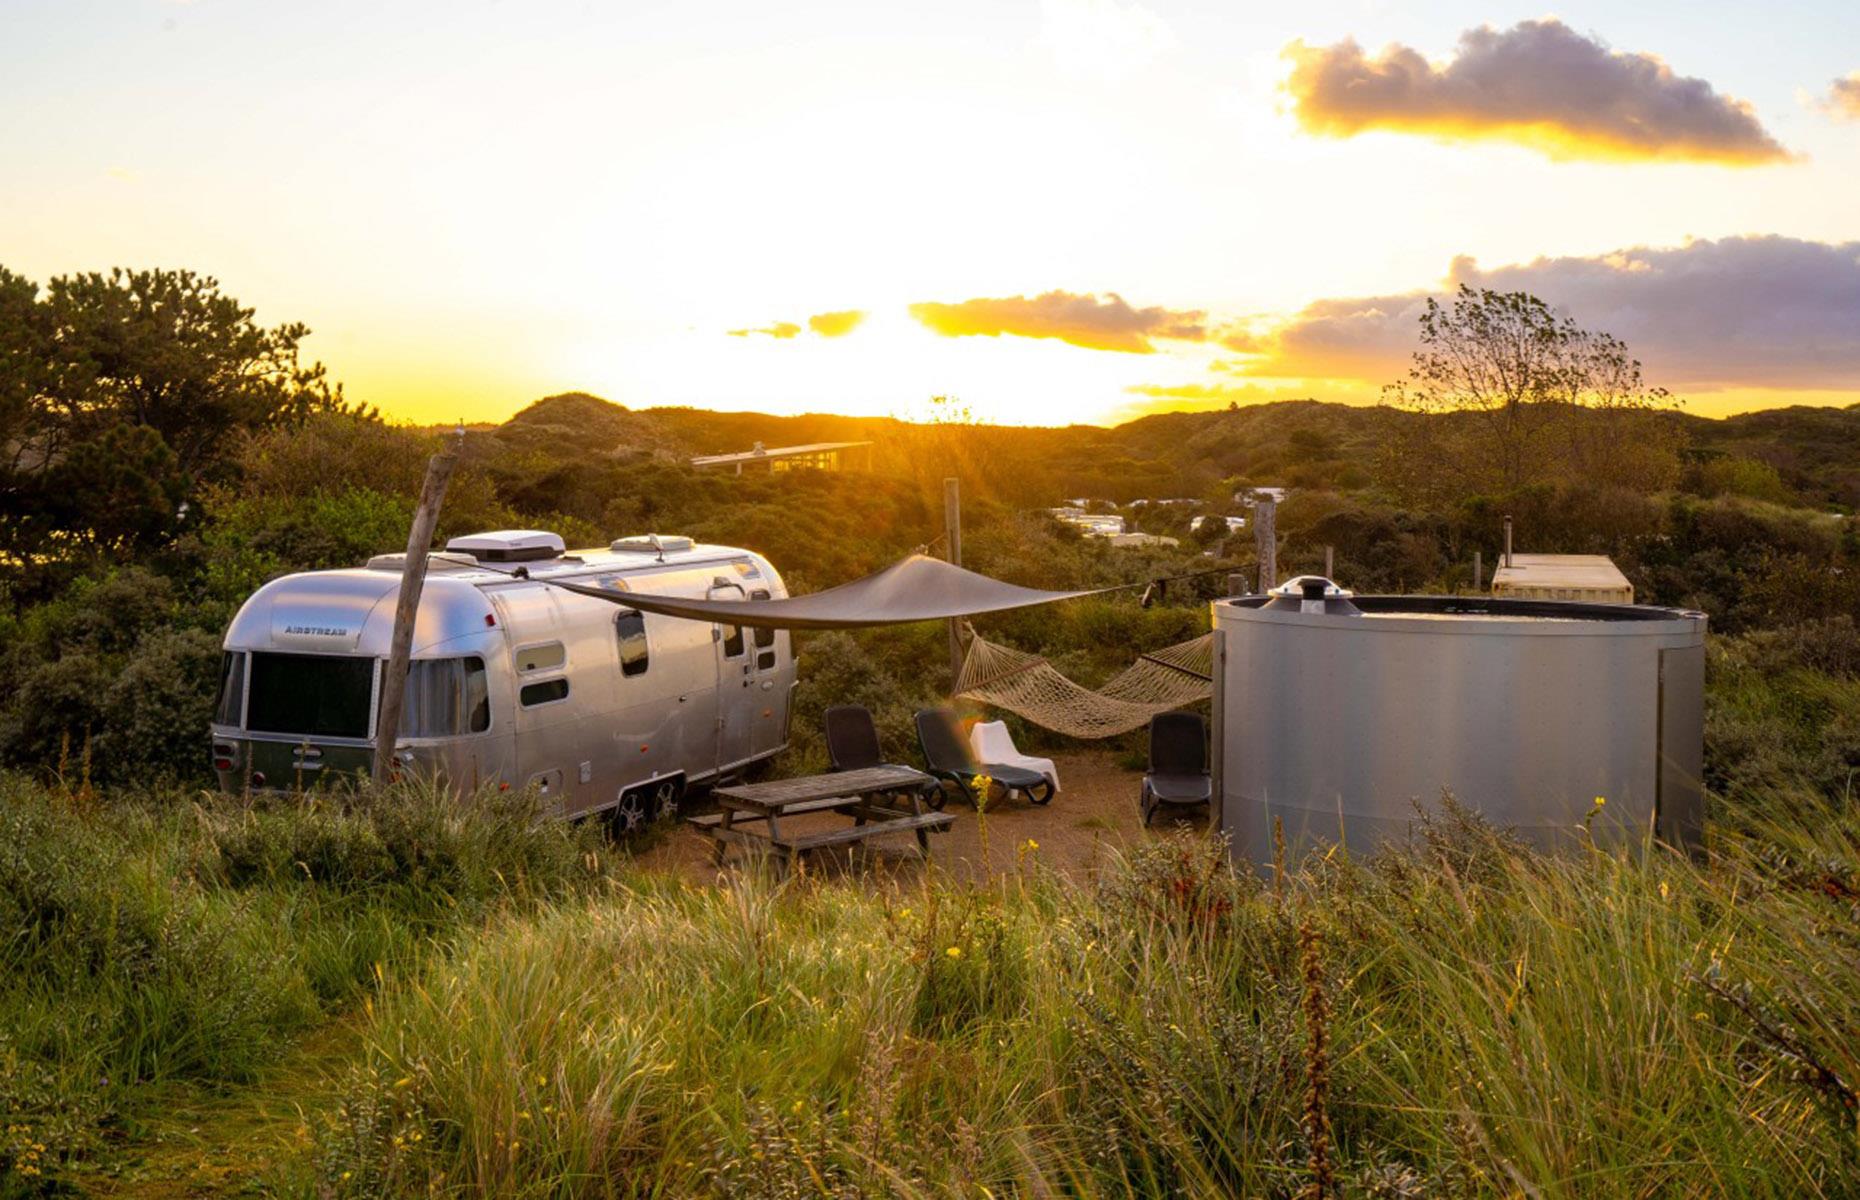 <p>Hidden in a sand dune behind the Netherland’s golden Bloemendaal’s beach, this hip, shiny <a href="https://www.campingdelakens.com/overnachten/accommodaties/accommodatie/102/Airstream">Airstream</a> comes with its own private sauna and a hammock to just kick back and soak up the view. It’s part of the De Lakens camping ground in the heart of the Zuid-Kennemerland National Park, so you’ll have access to all its first-class amenities too.</p>